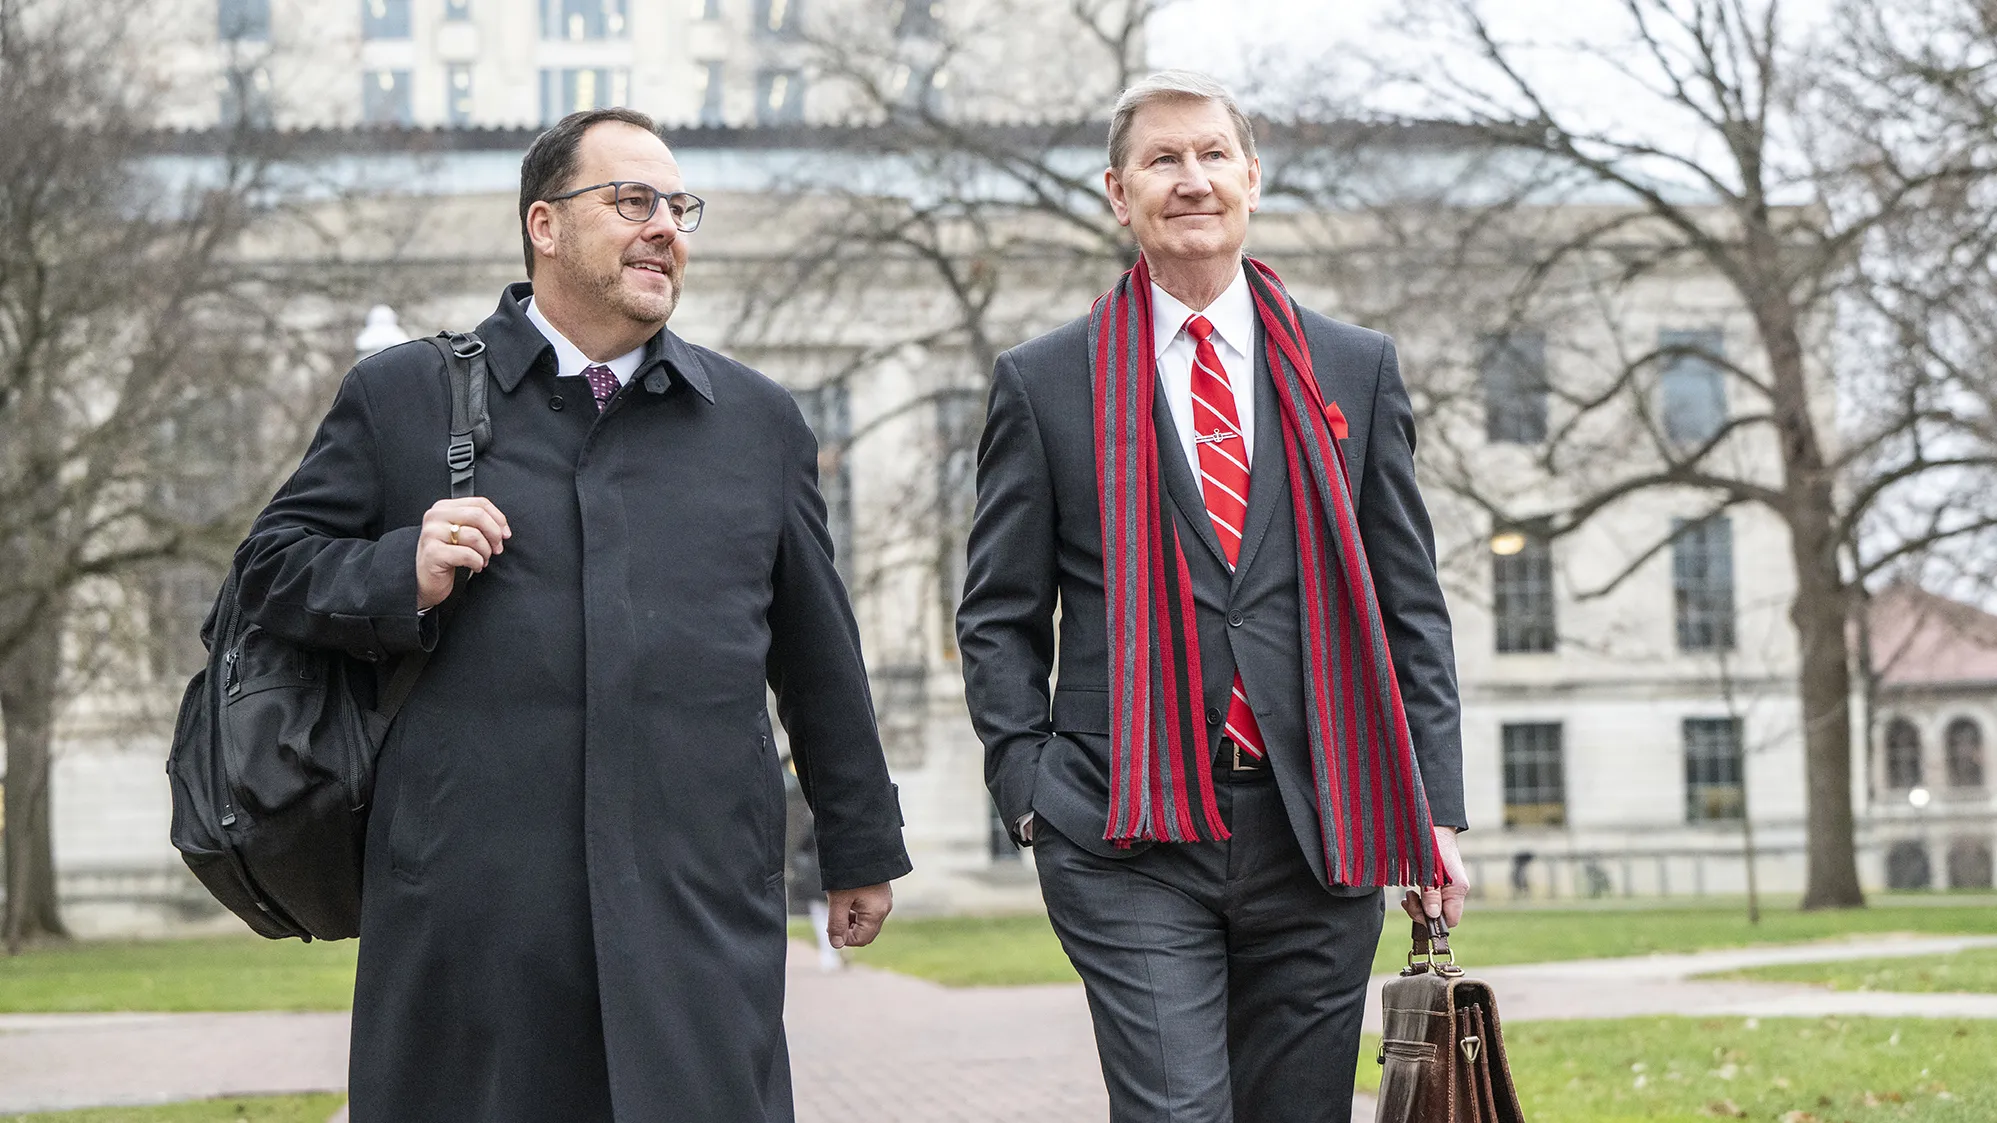 Ohio State President Ted Carter crosses the Oval with a confident but slight smile as we walks next to a university official. Carter wears a suit and long staff striped in Ohio State colors. JR Blackburn wears a black work coat and carries a backpack. In the background are stately academic buildings. The trees are bare but the grass is green